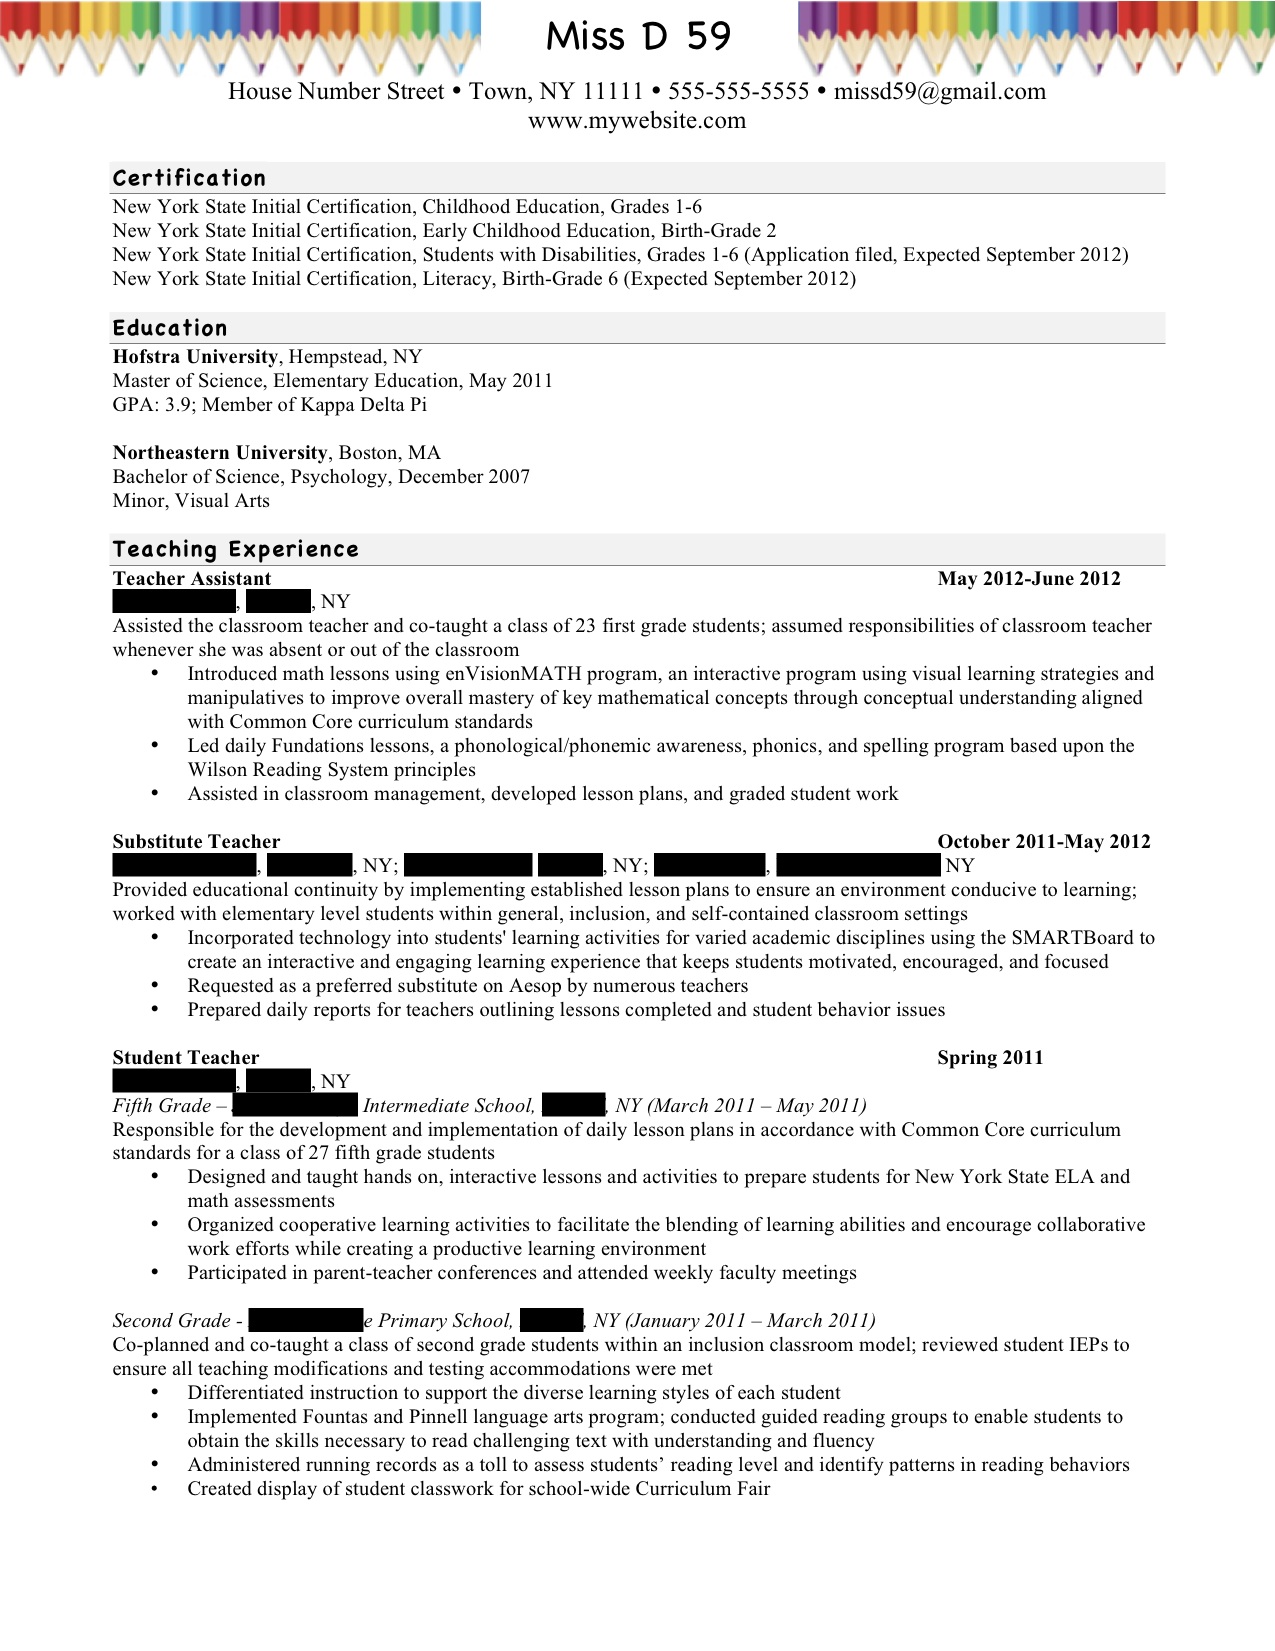 Resume for early childhood special education teacher